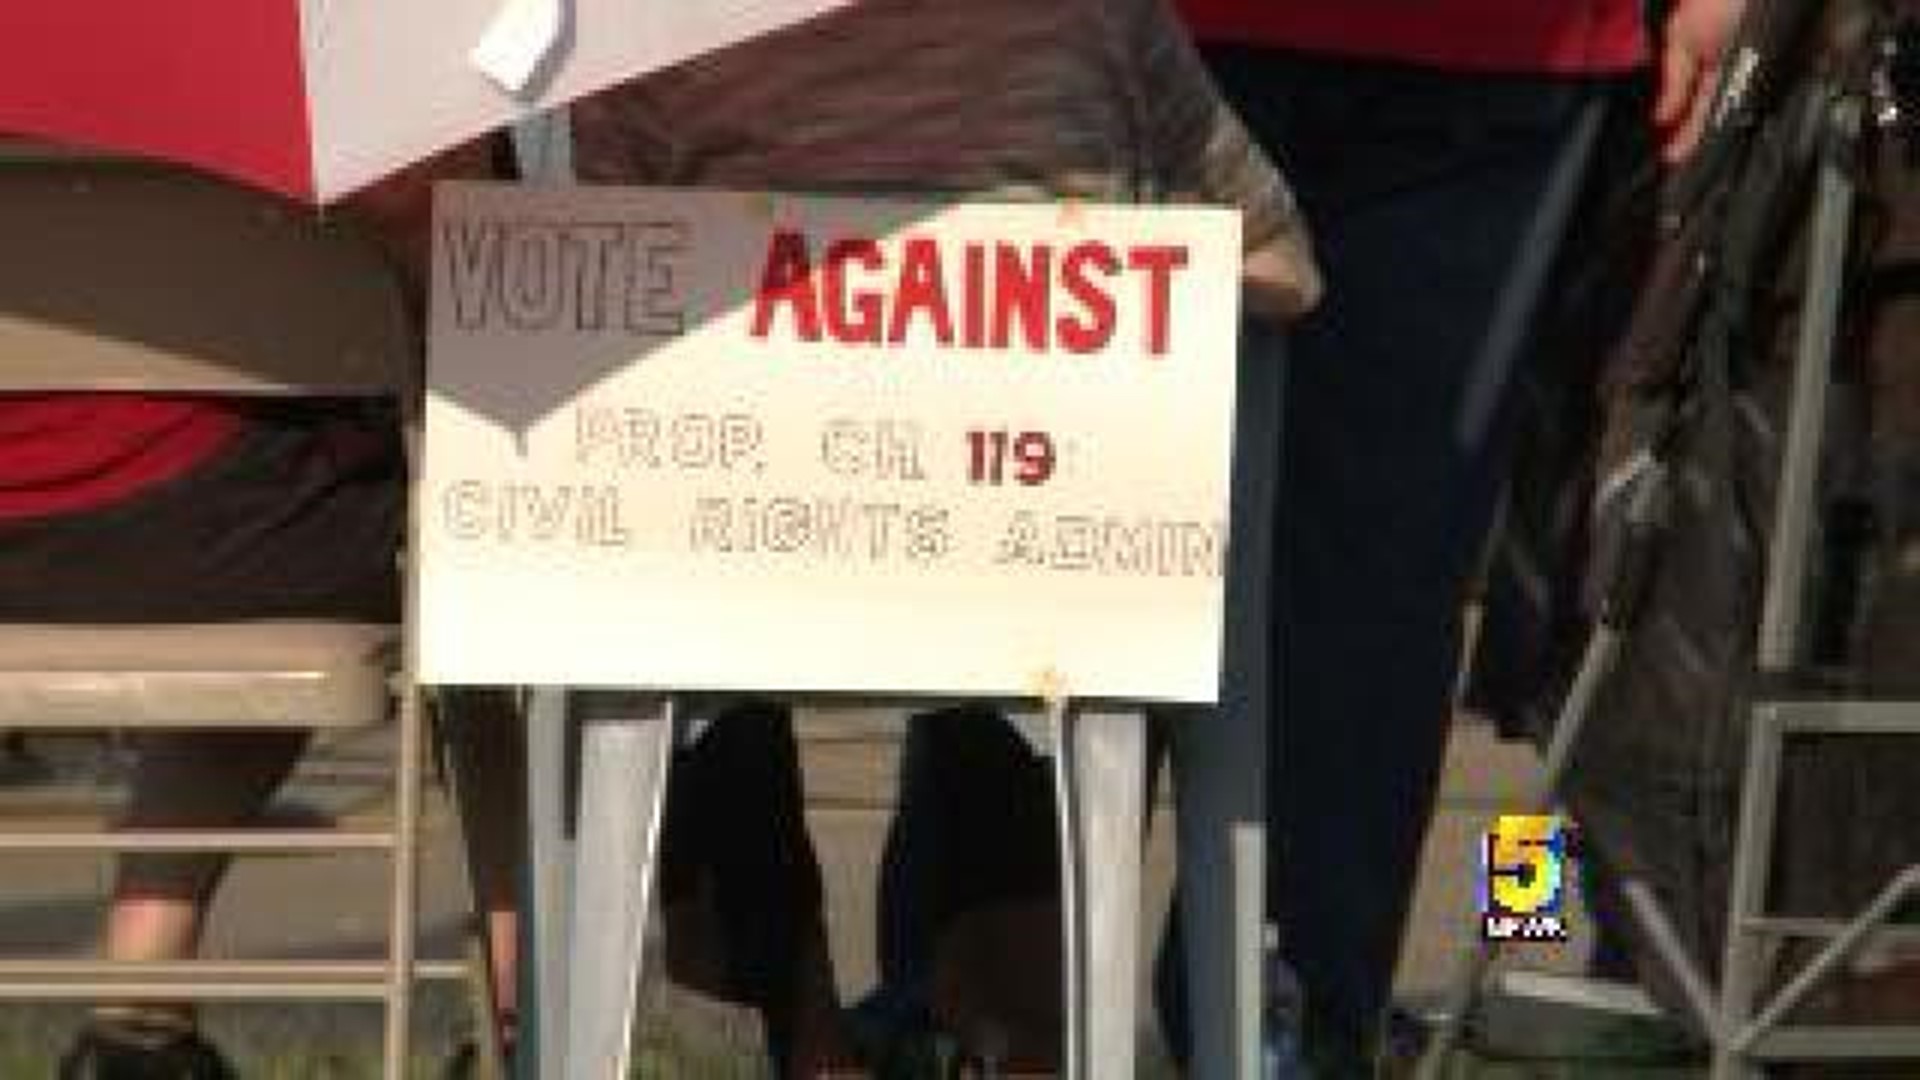 Rally On Fayetteville Square Against Anti-Discrimination Ordinance